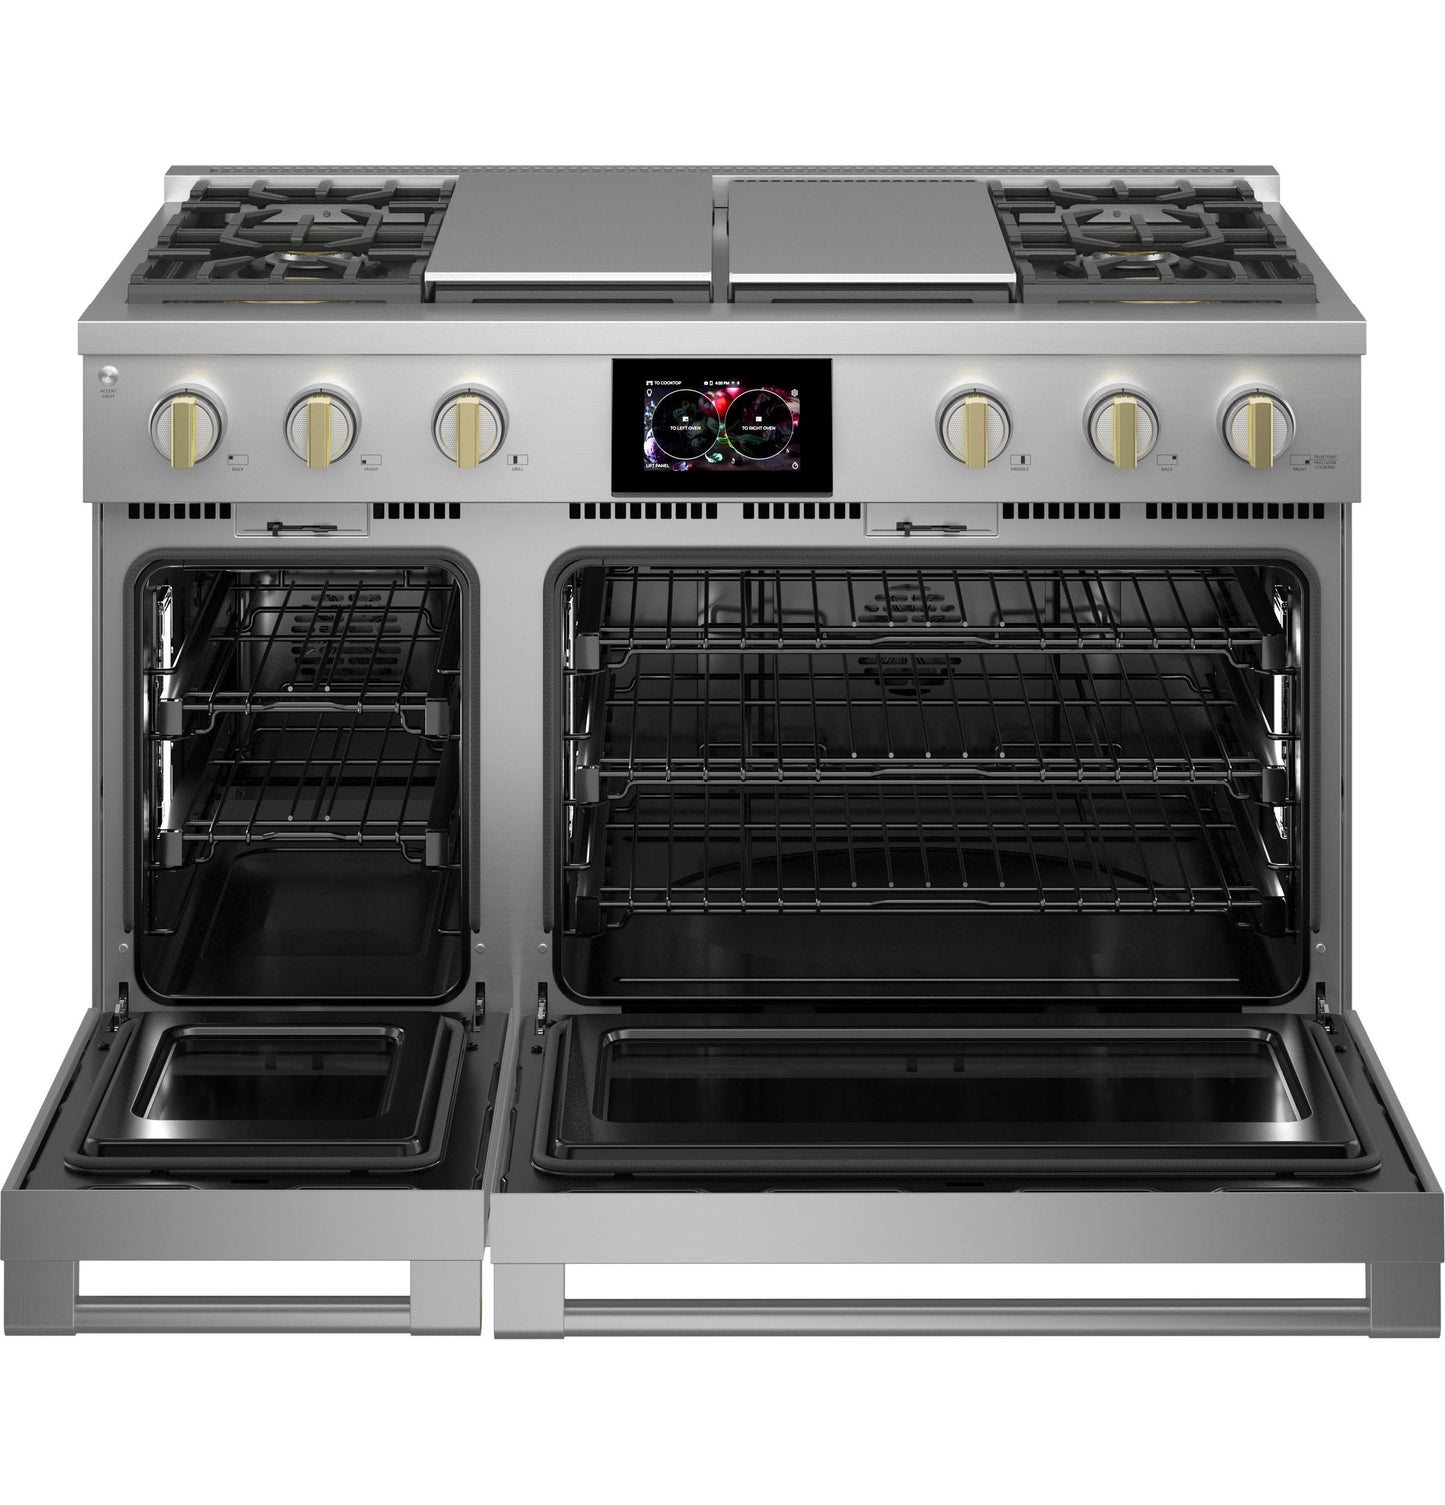 Monogram ZDP484NGTSS Monogram 48" Dual-Fuel Professional Range With 4 Burners, Grill, And Griddle